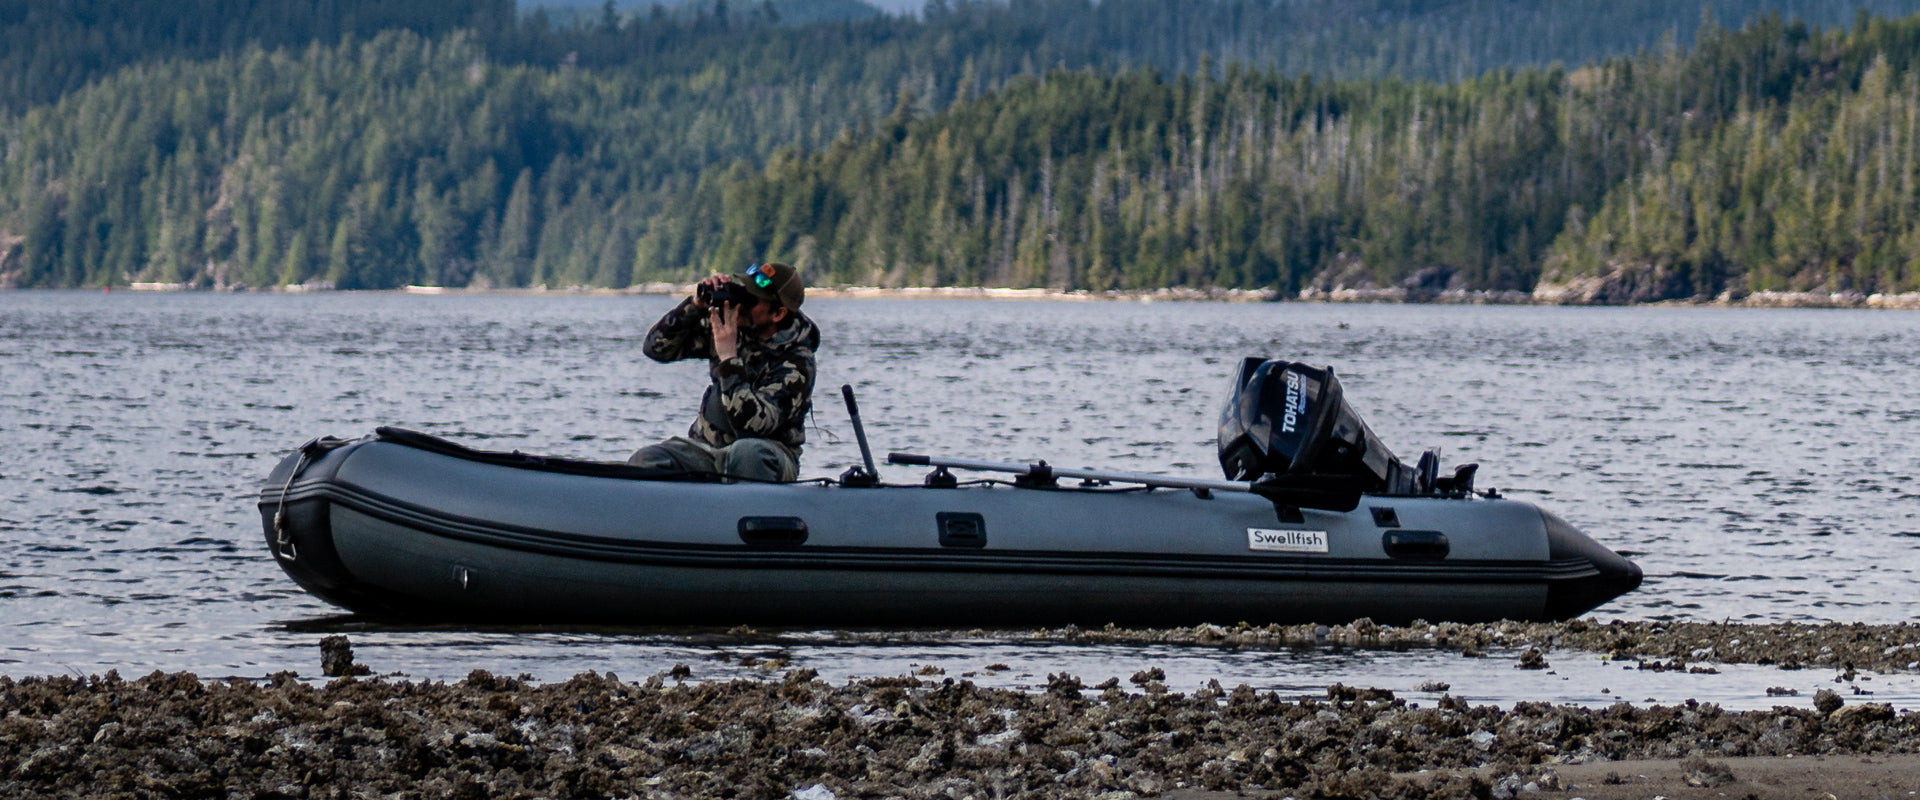 Hunters appreciate the portability of the Classic Inflatable boat. It folds up easily into a truck and deploys in under 15 min. 